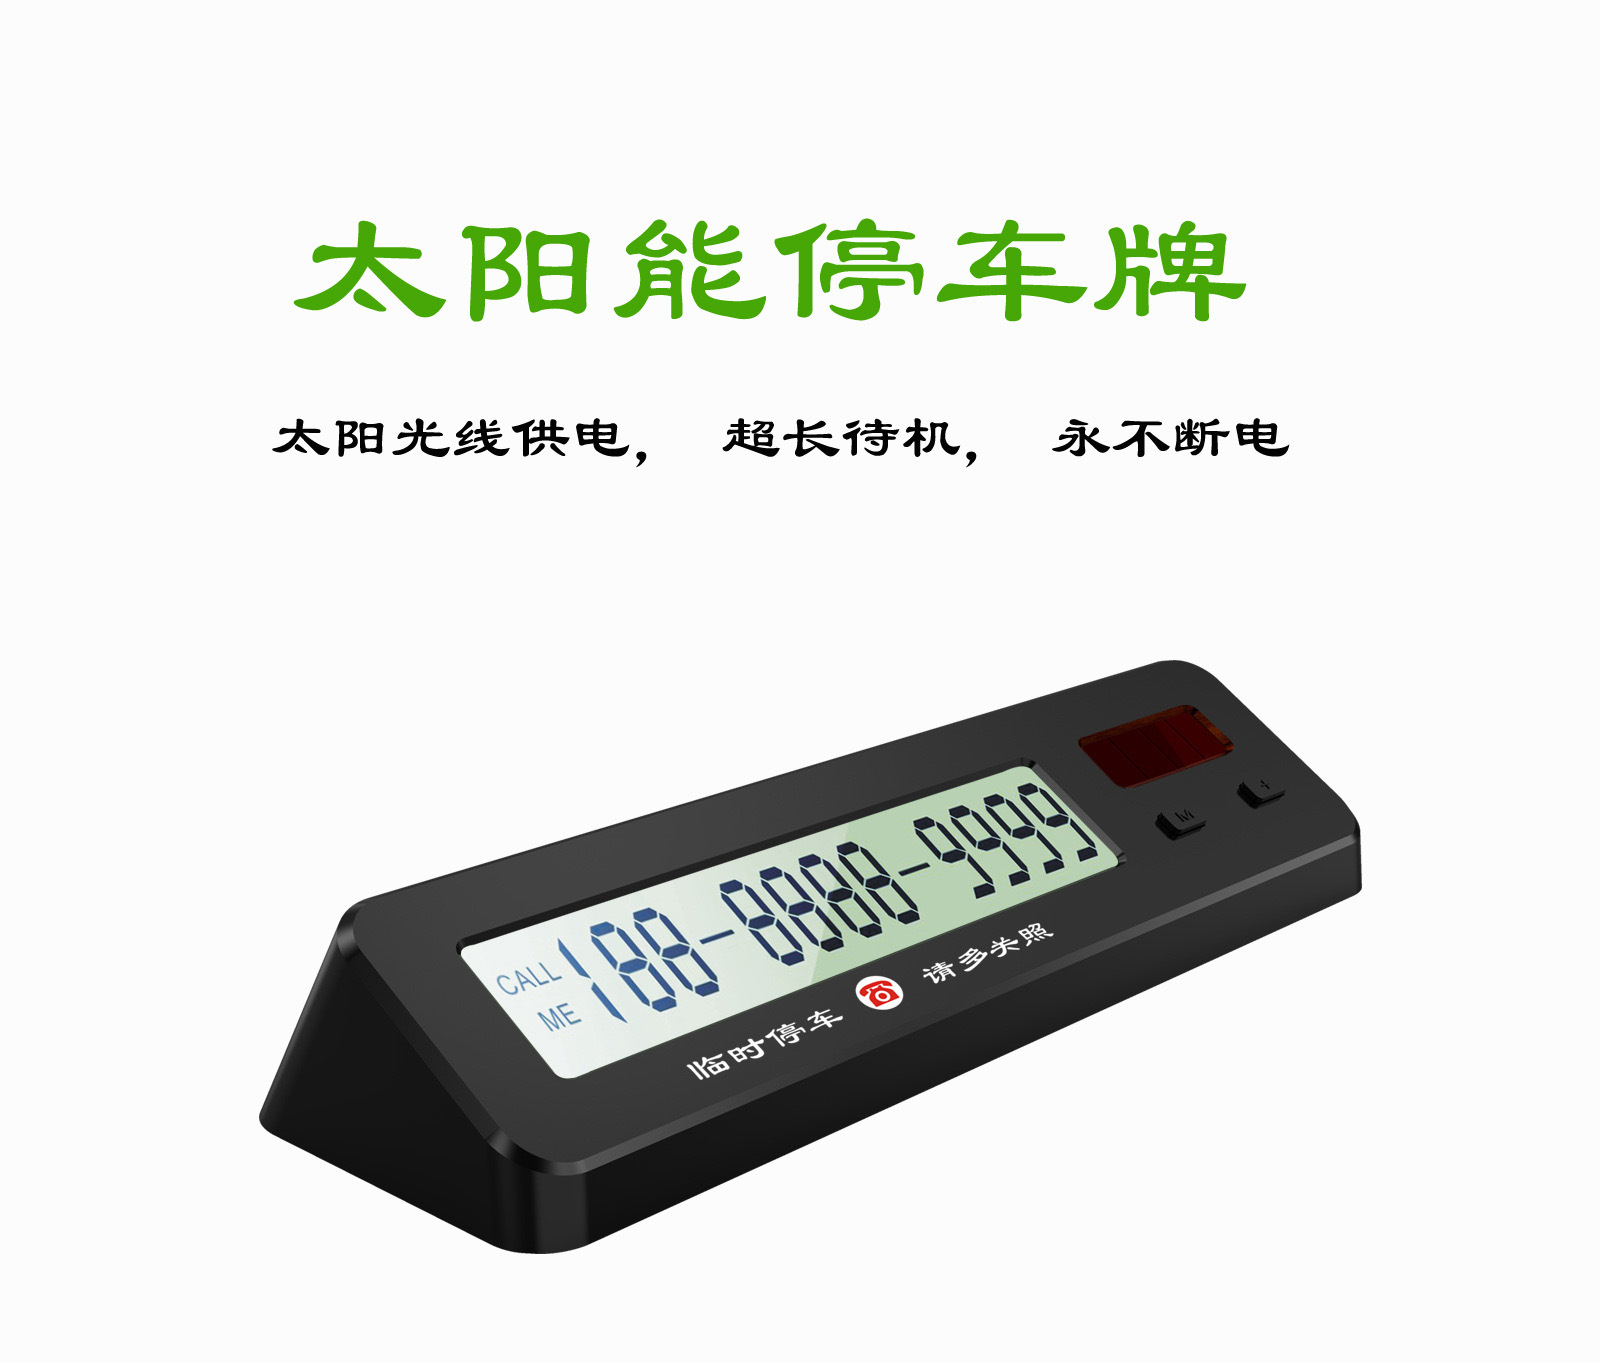 Temporary Stop sign solar energy Electronics digital display Plate Temporary Dock Telephone number Car Accessories Decoration